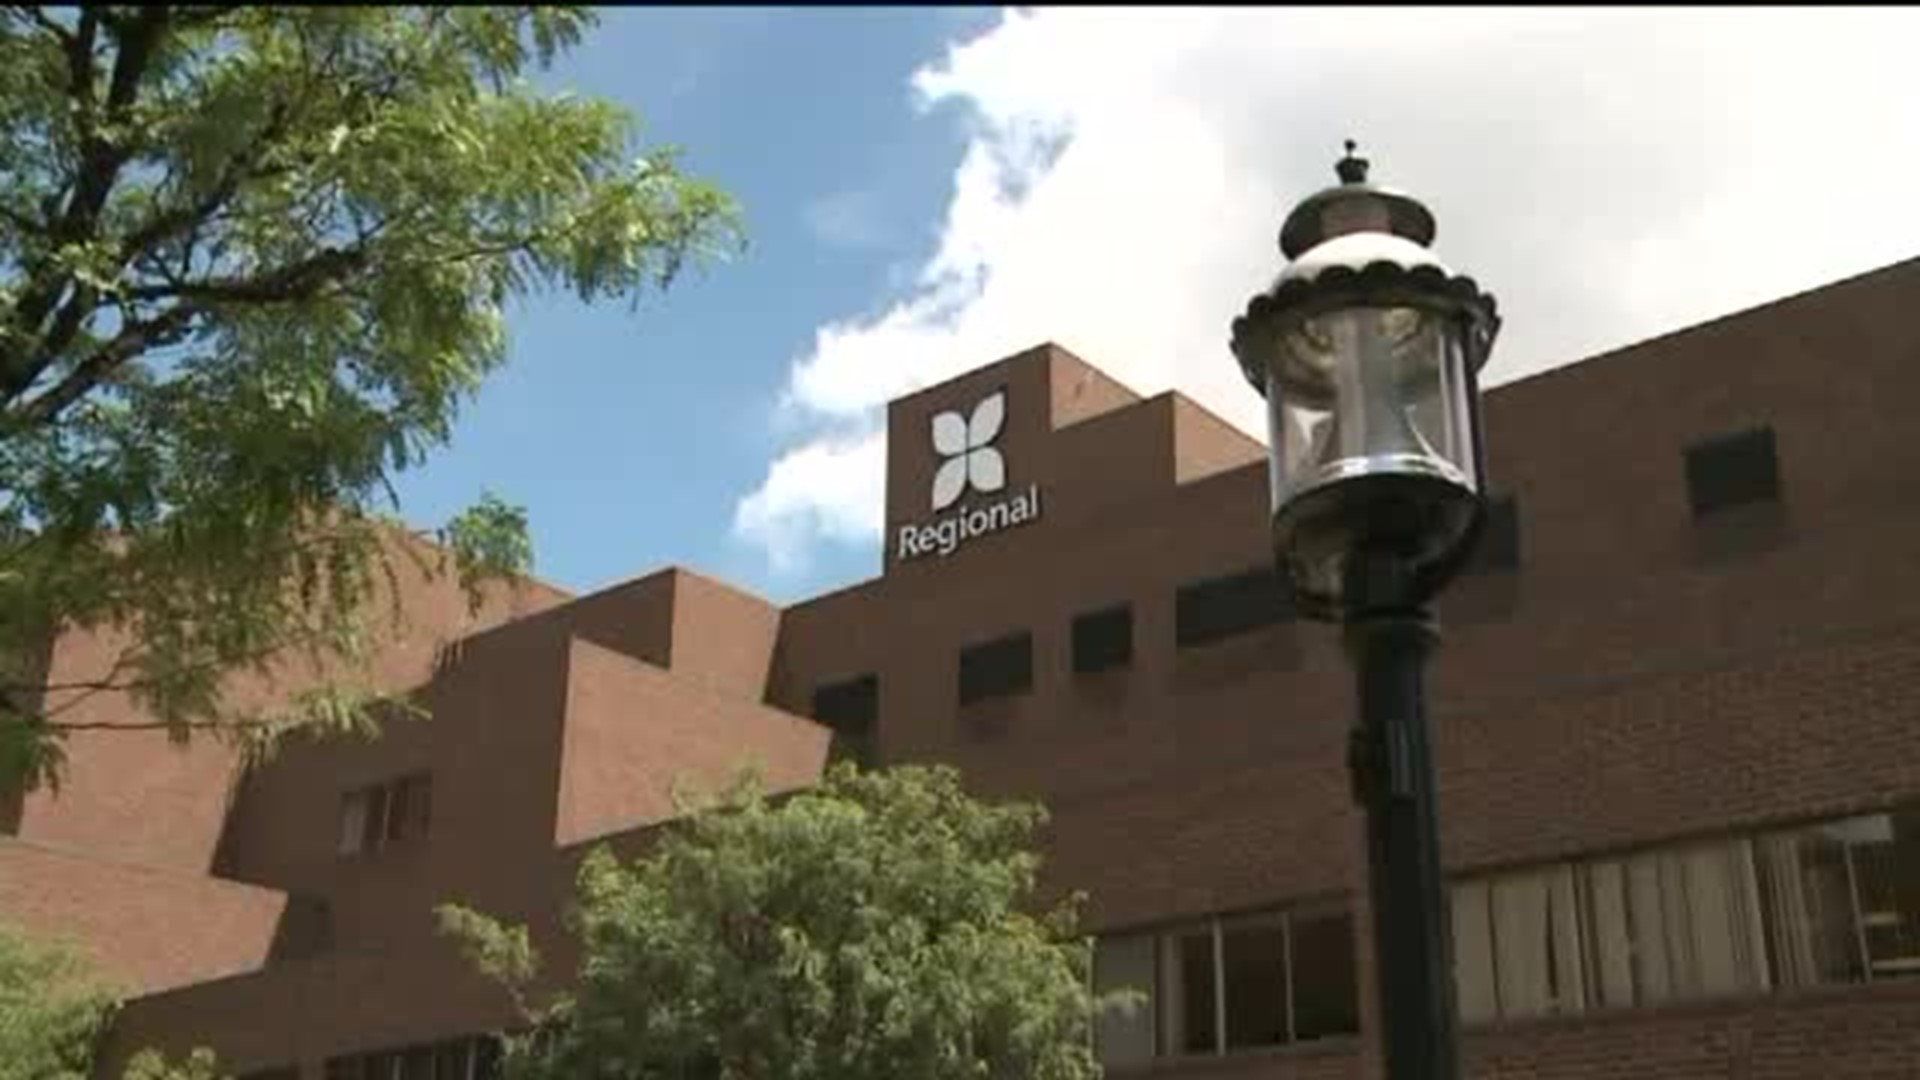 Commonwealth Health Reacts to Data Breach